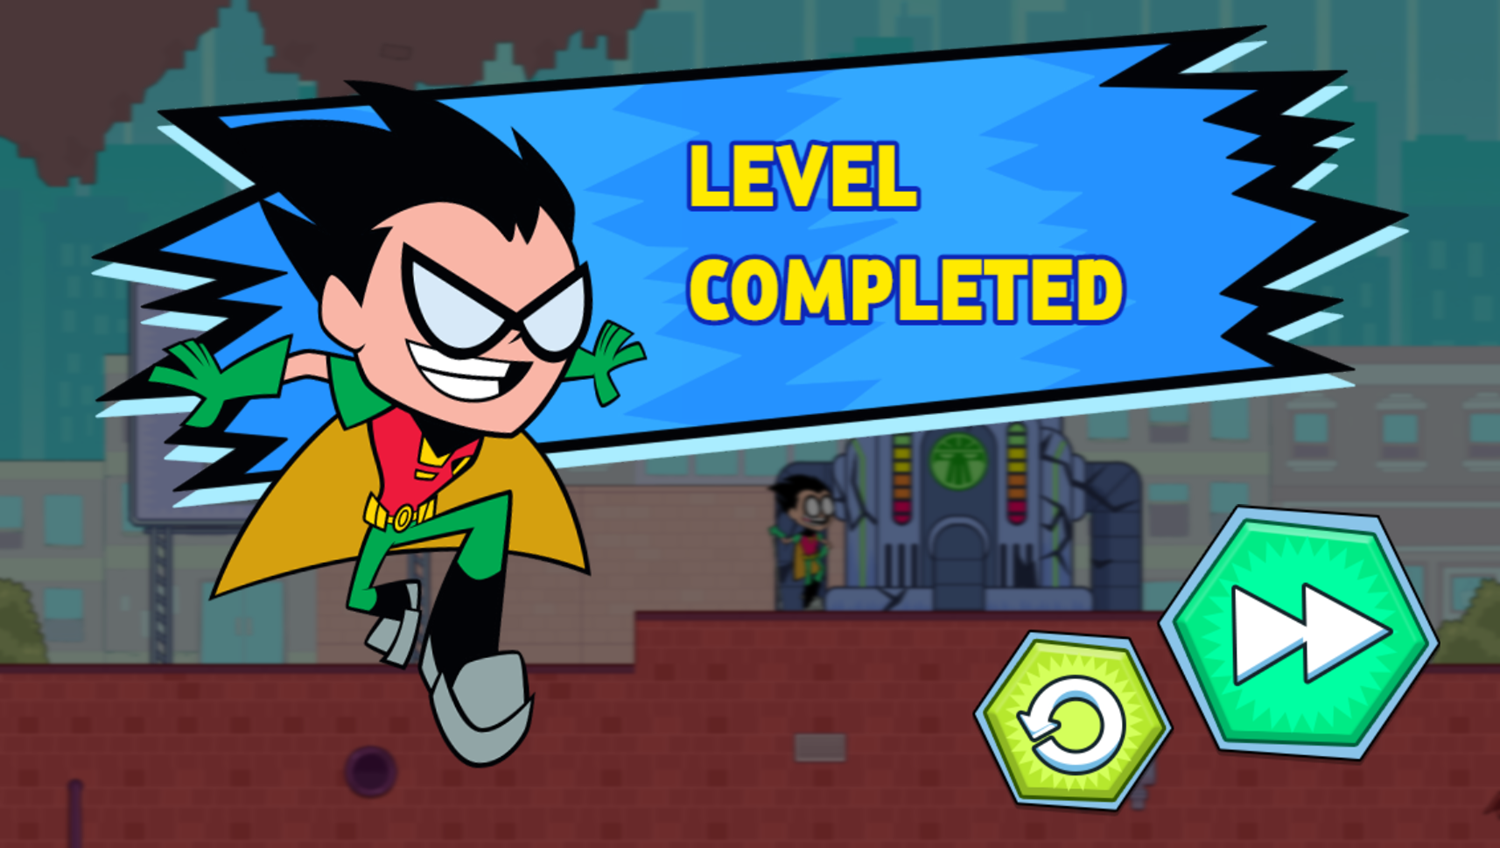 Teen Titans Go Jump City Rescue Game Level Completed Screenshot.